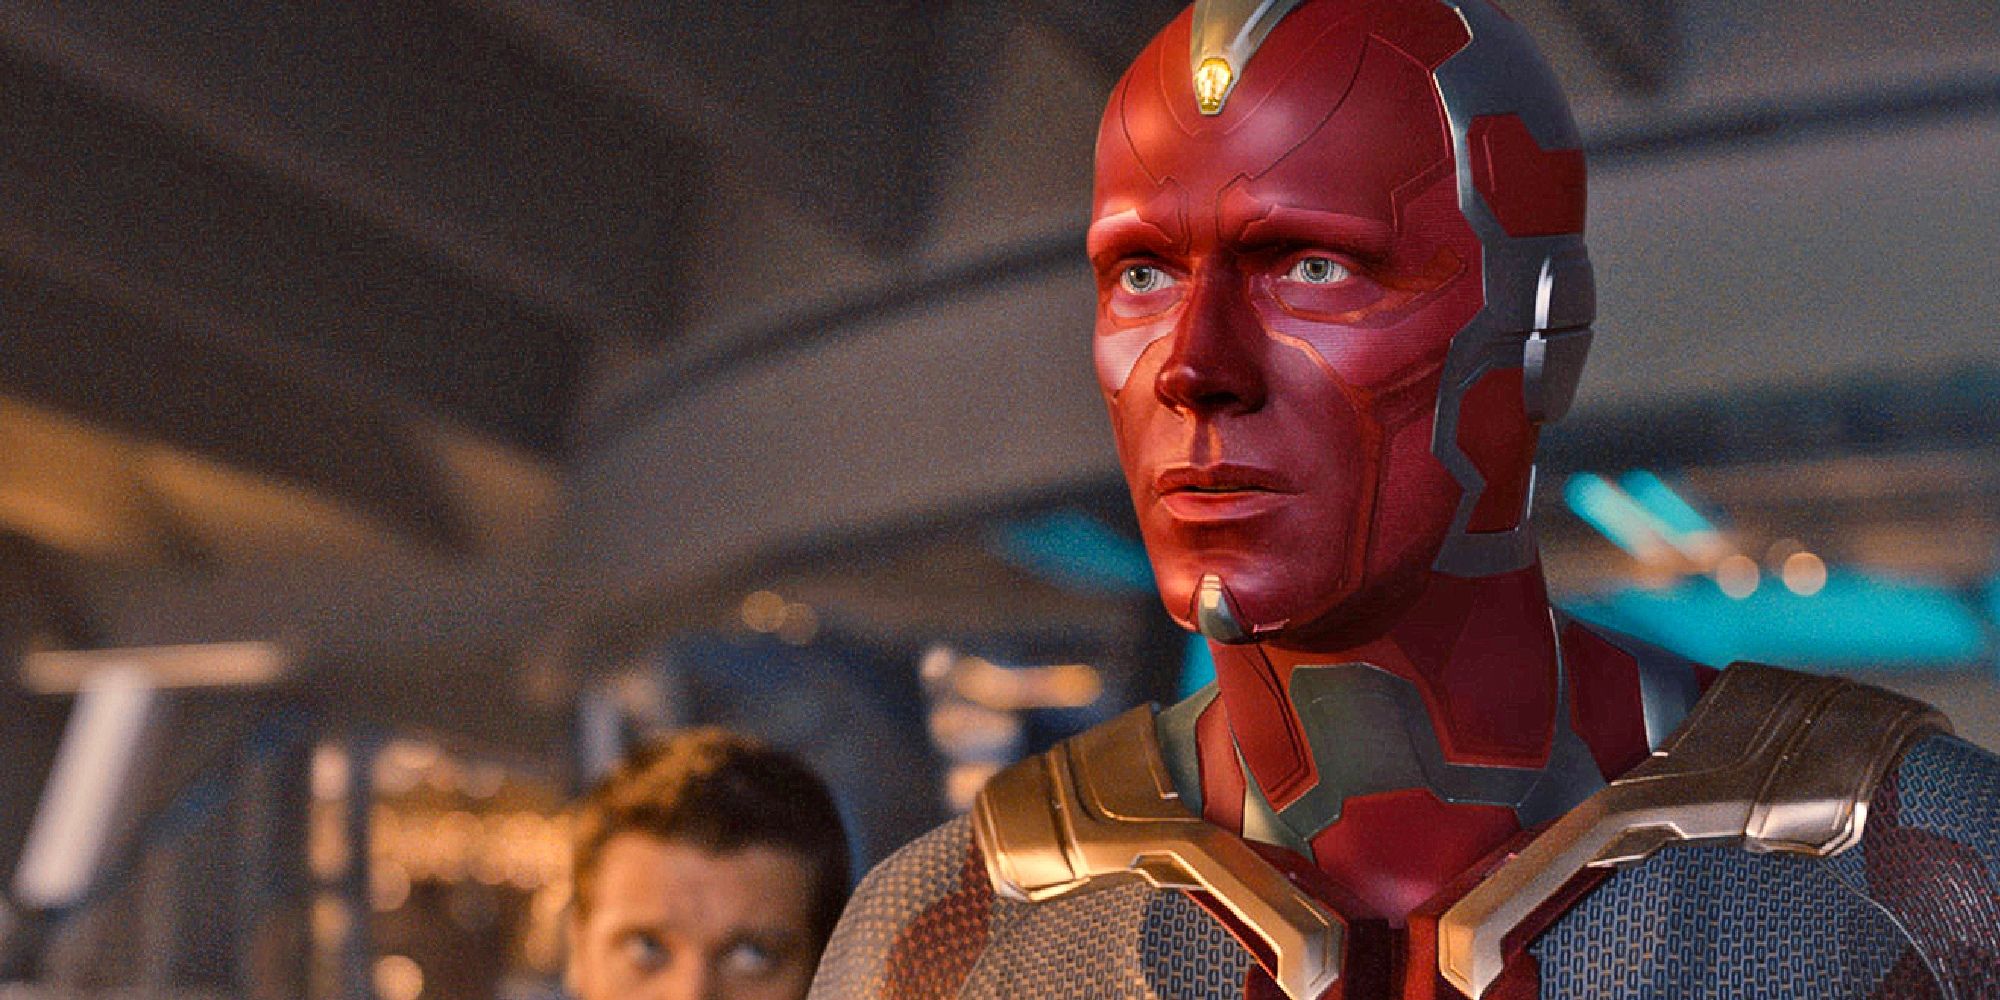 Paul Bettany as Vision looking intently off camera in Avengers: Age of Ultron 